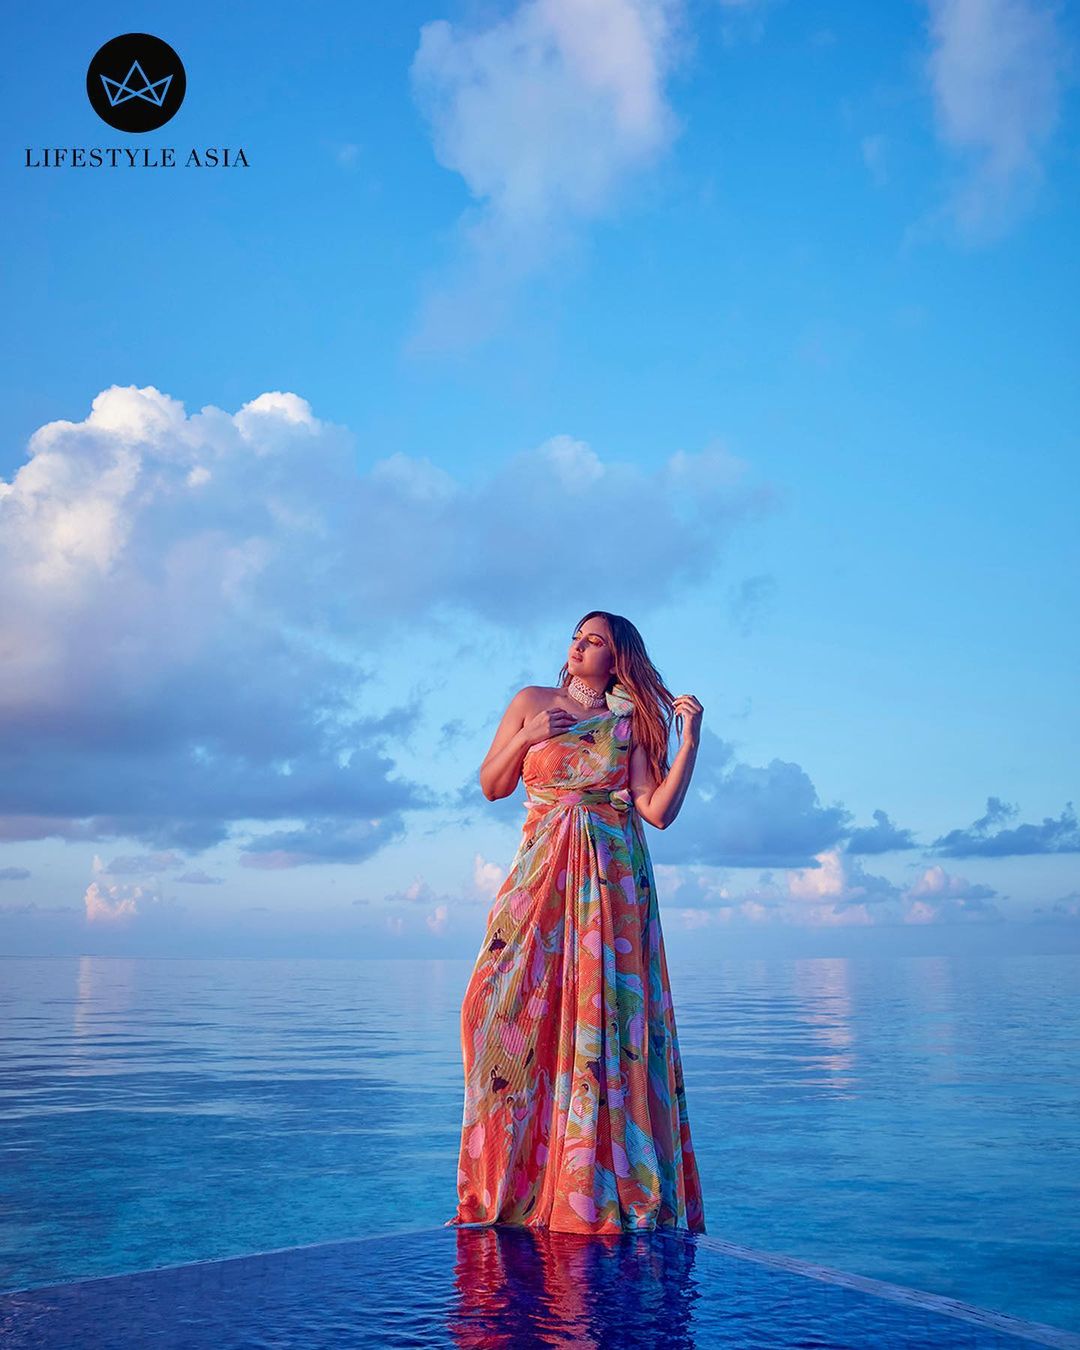 Sonakshi Sinha is a vision to behold in the maxi dress